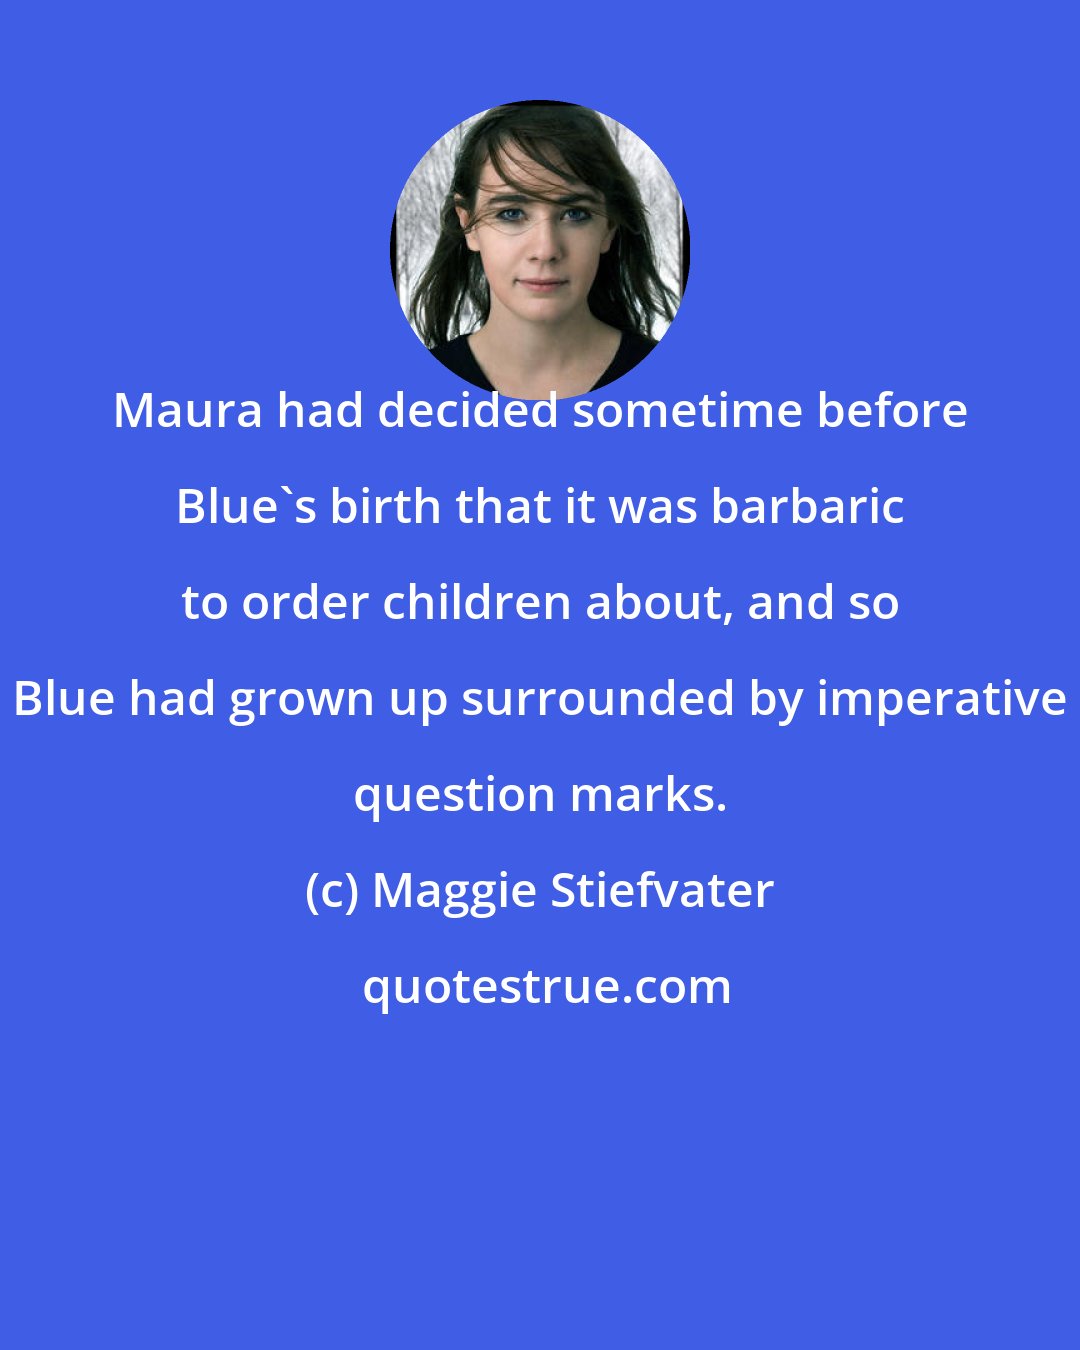 Maggie Stiefvater: Maura had decided sometime before Blue's birth that it was barbaric to order children about, and so Blue had grown up surrounded by imperative question marks.